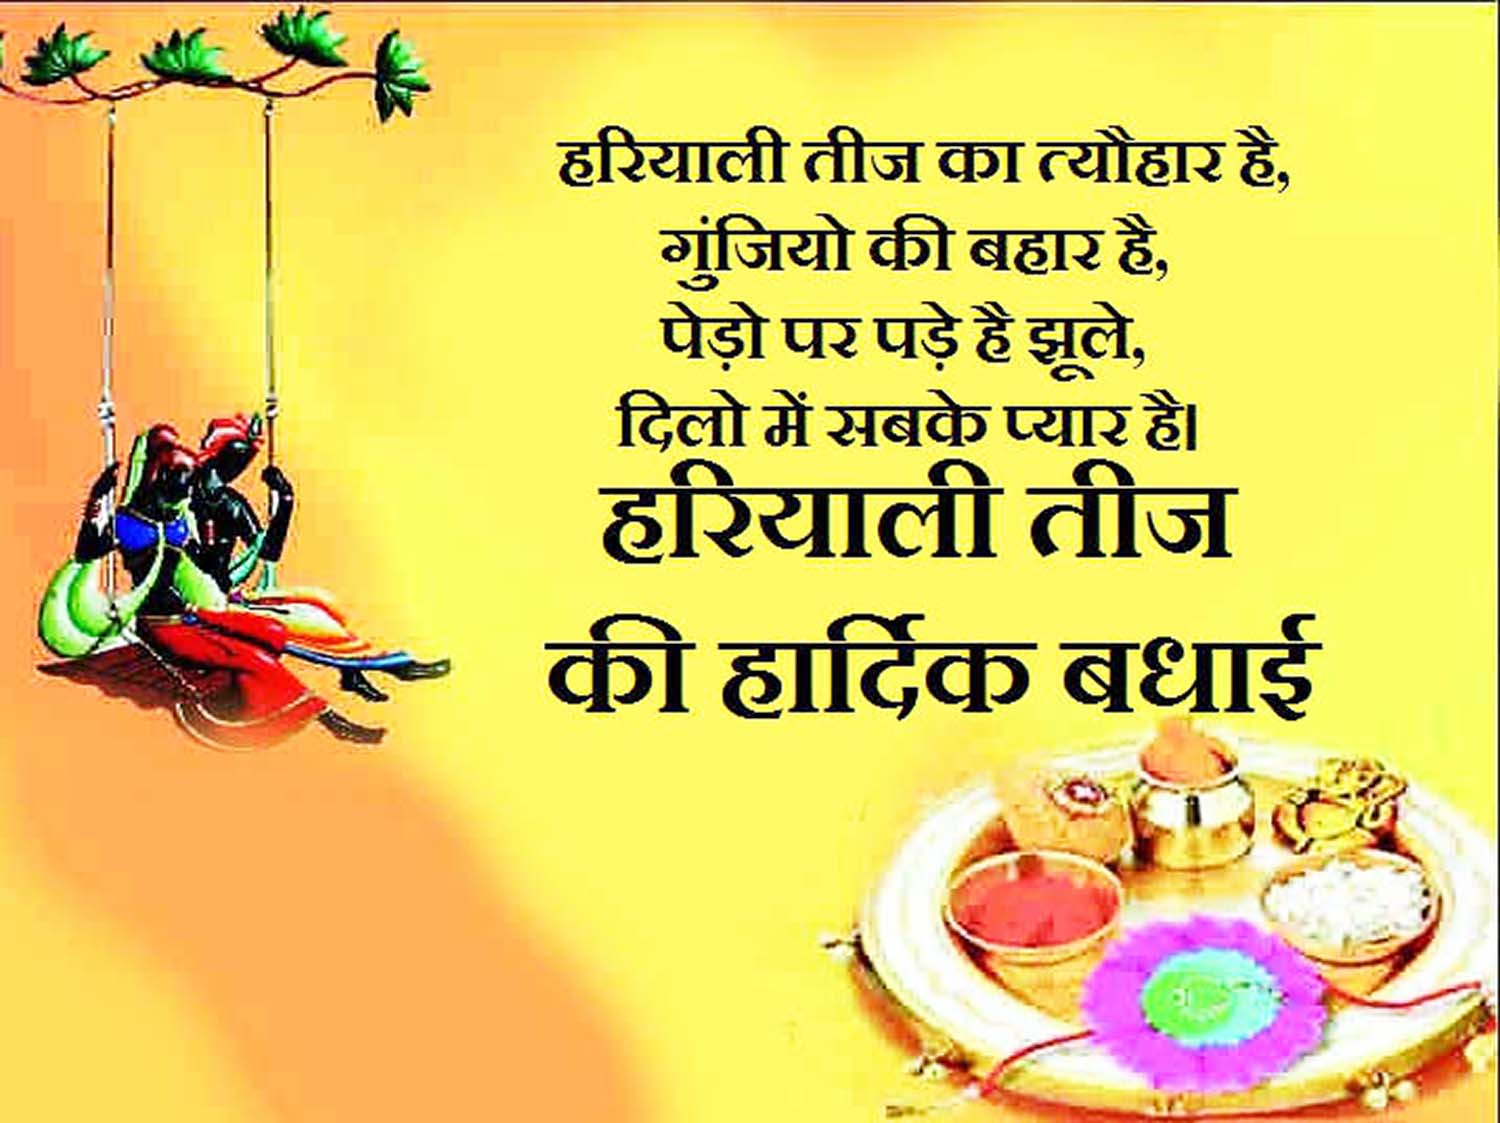 Happy Sawan Teej Images, Pictures And Wallpapers: Free Download |  